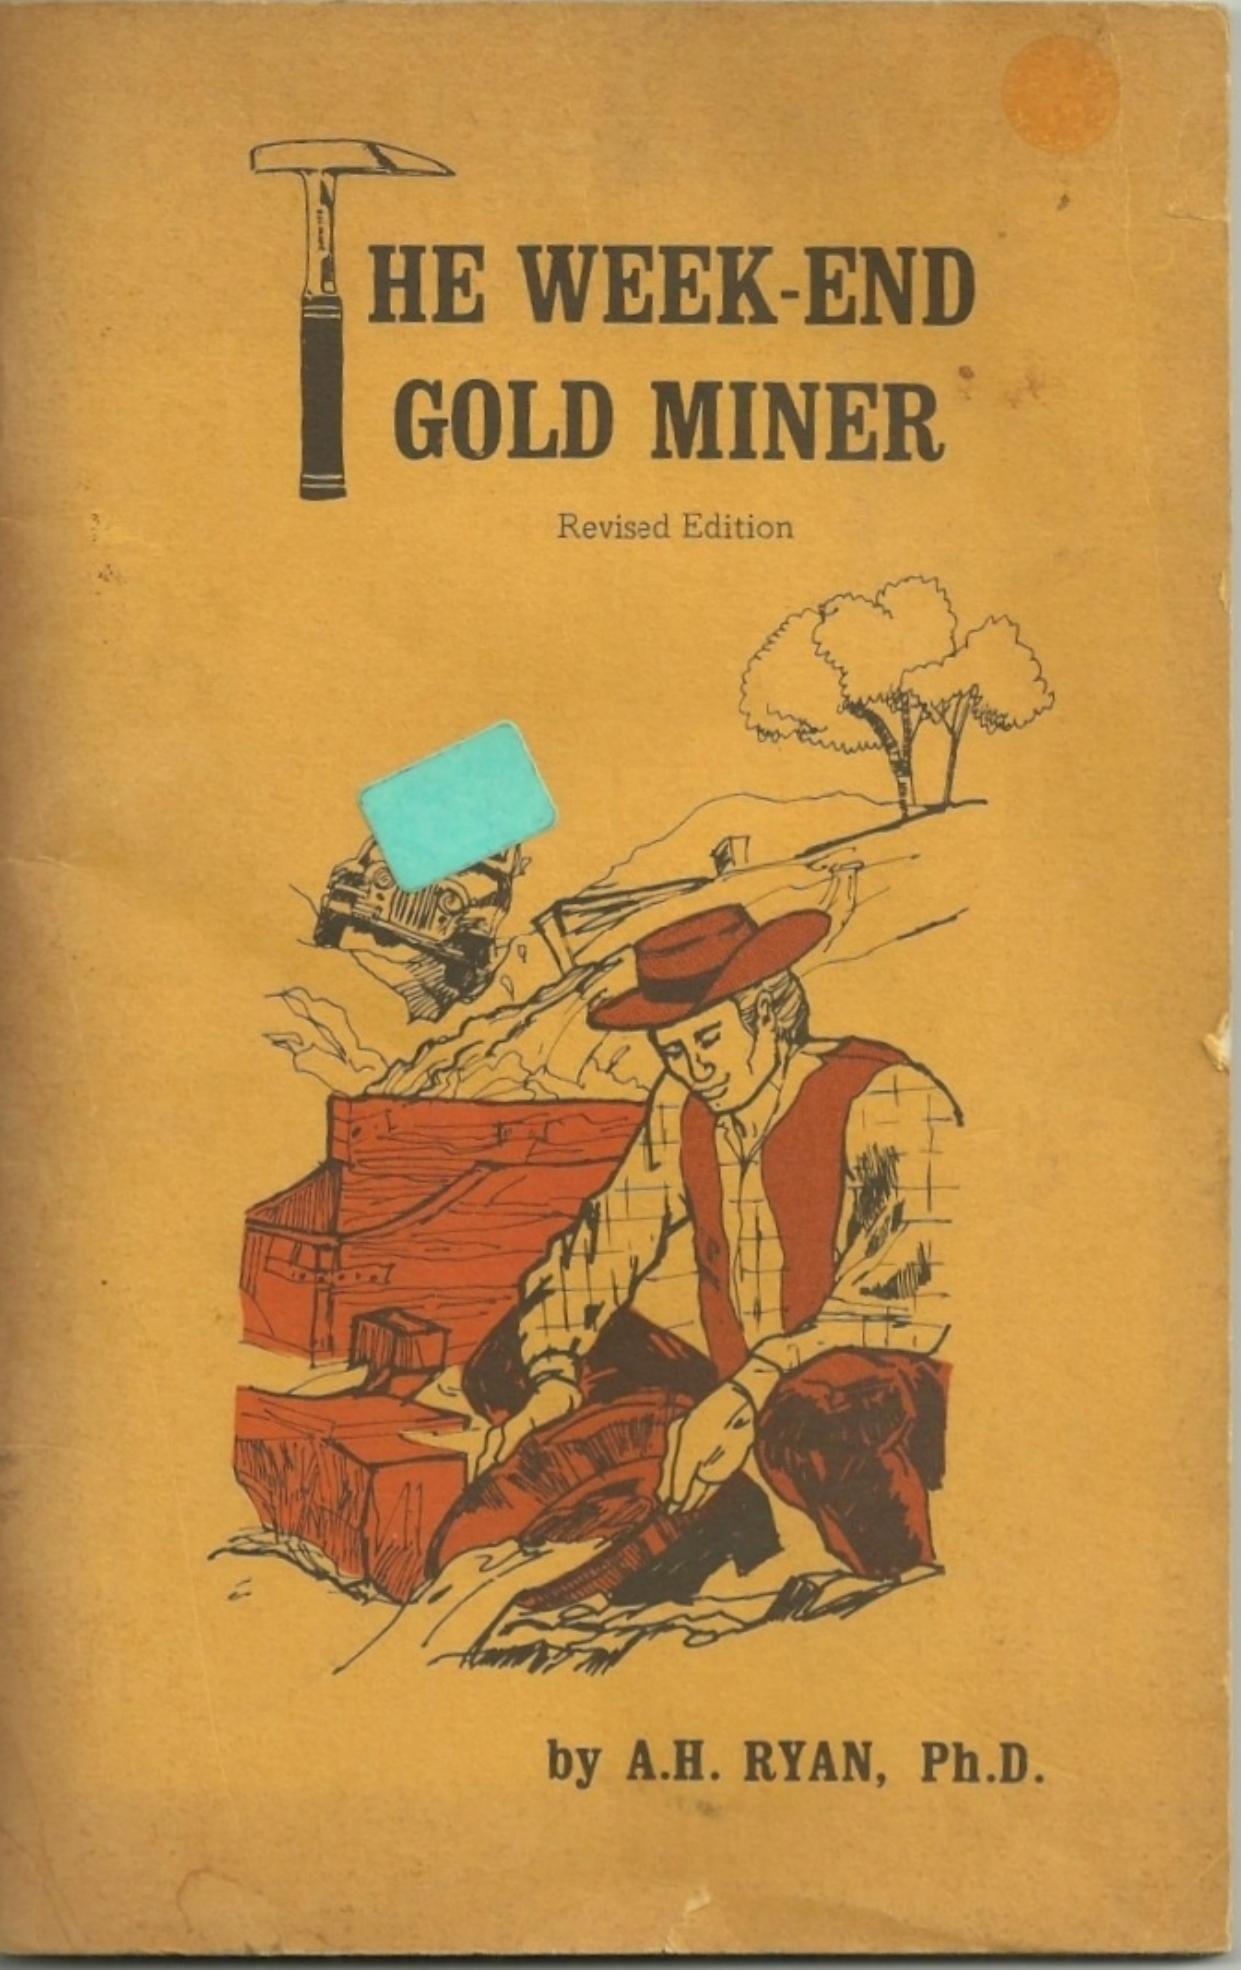 The Week-End Gold Miner by A. H. Ryan